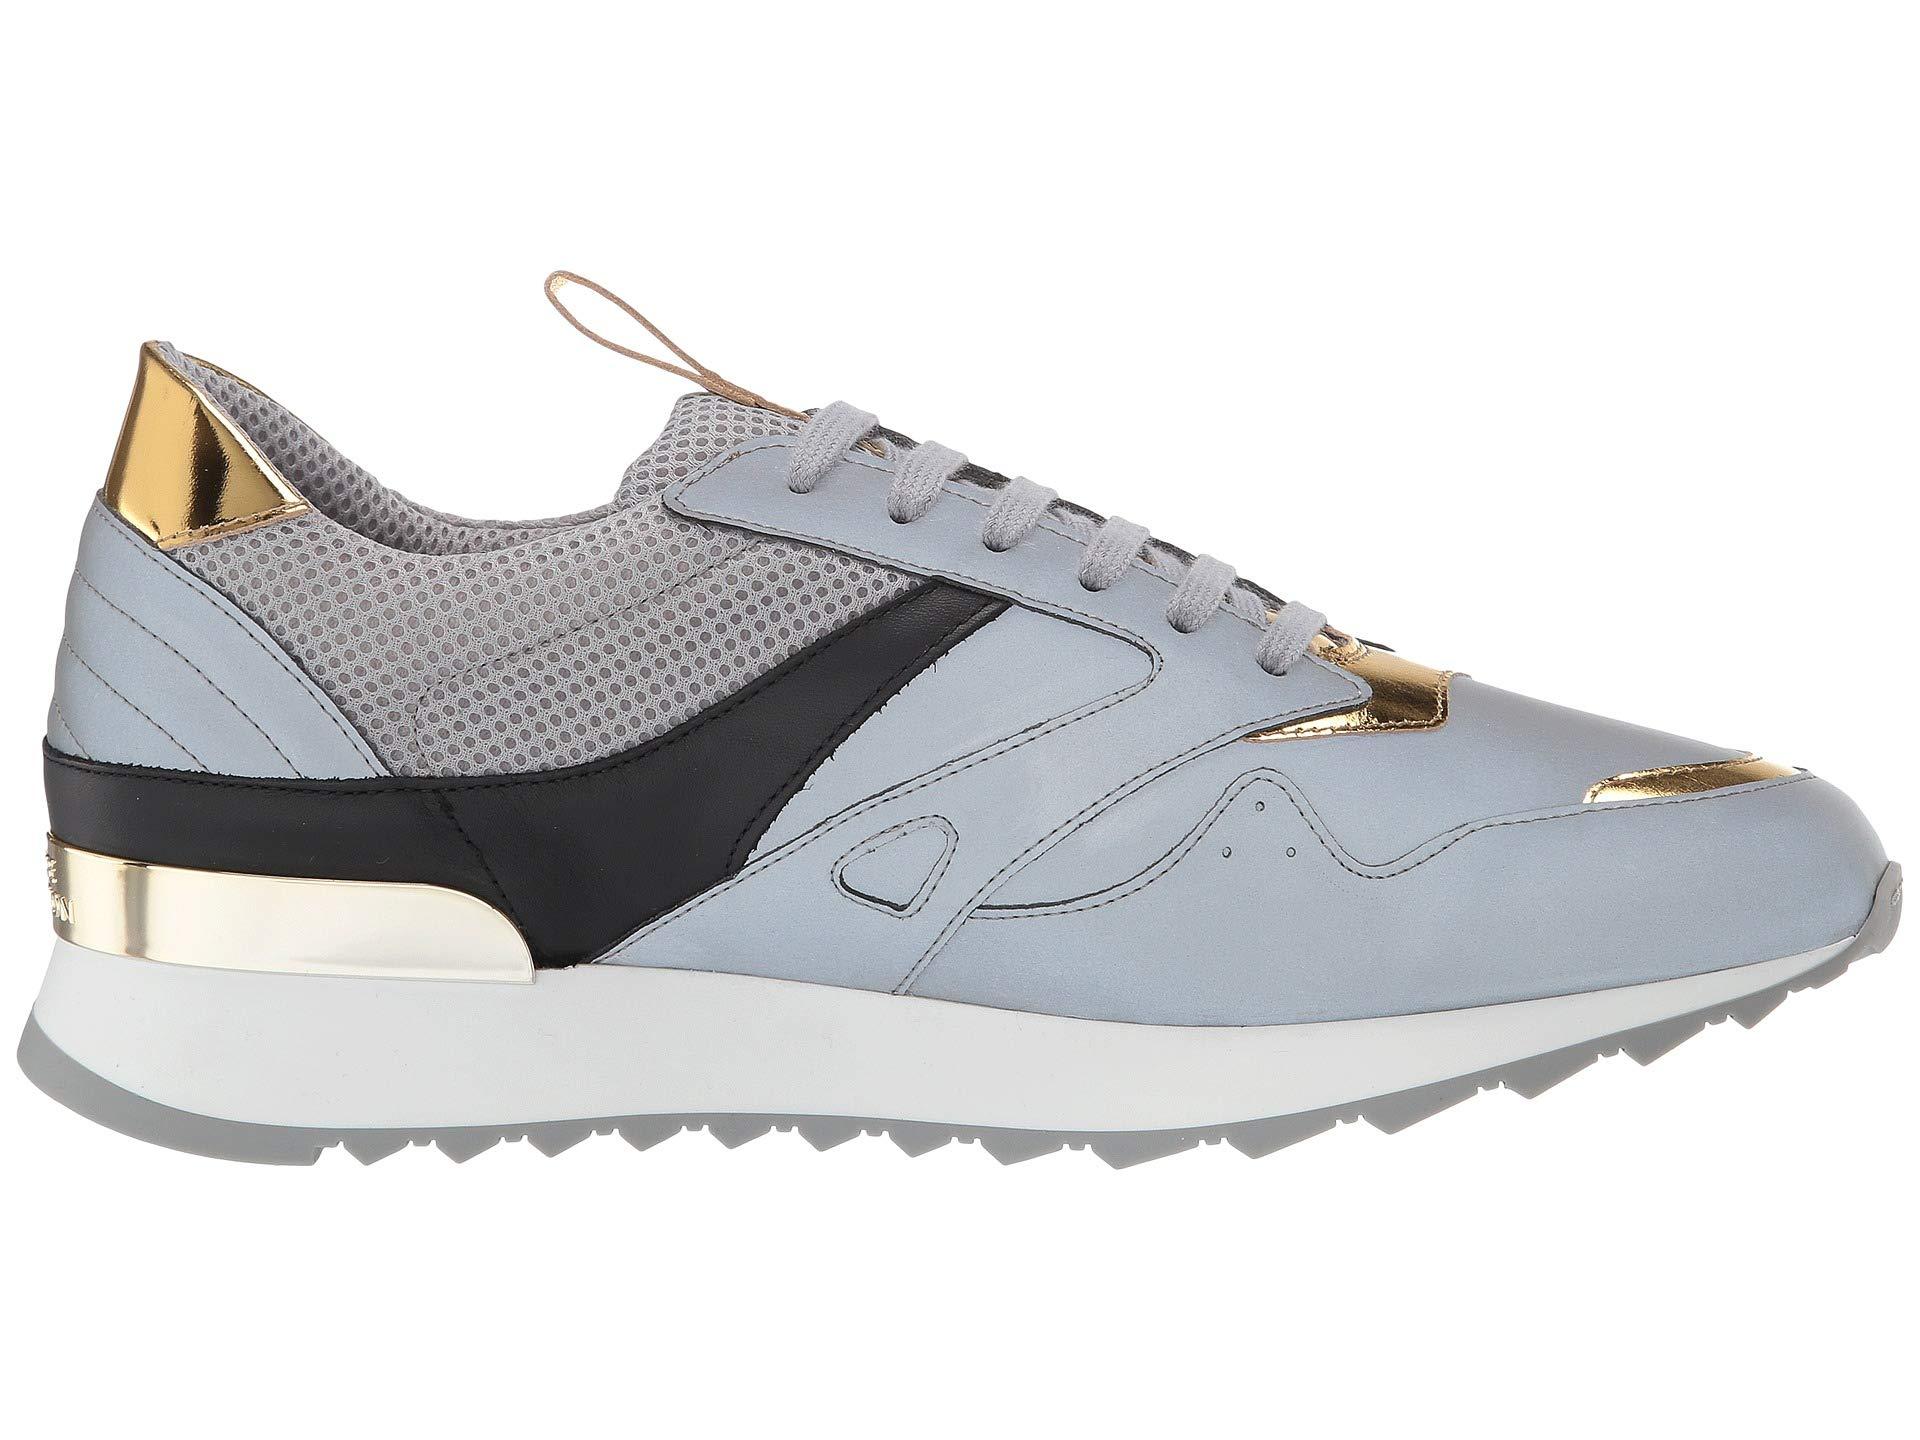 Versace Leather Reflective Runner in Gray for Men - Lyst